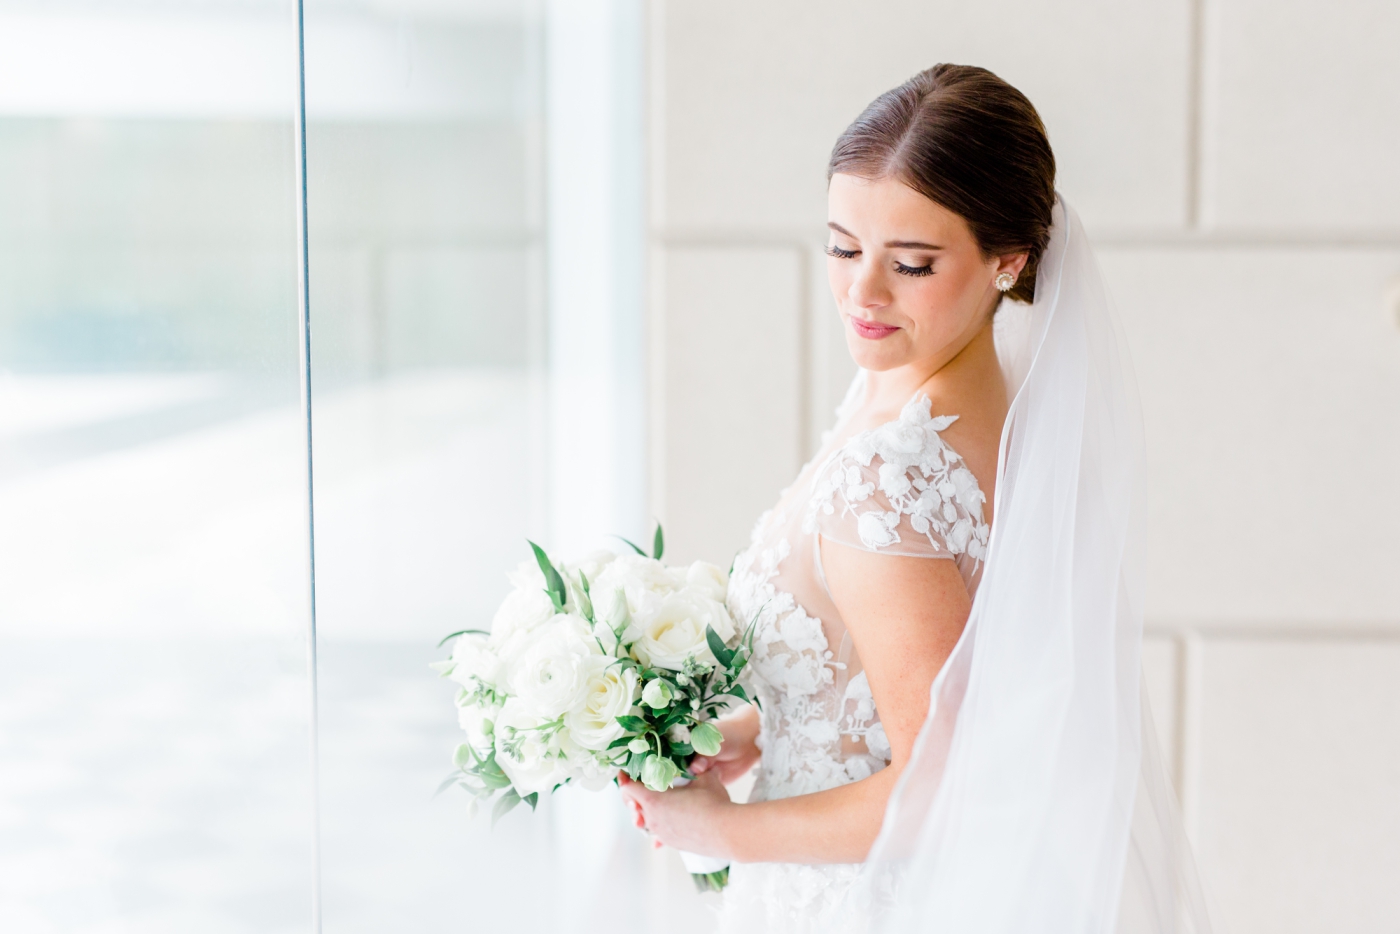 Bride in a Berta gown with white bridal bouquet